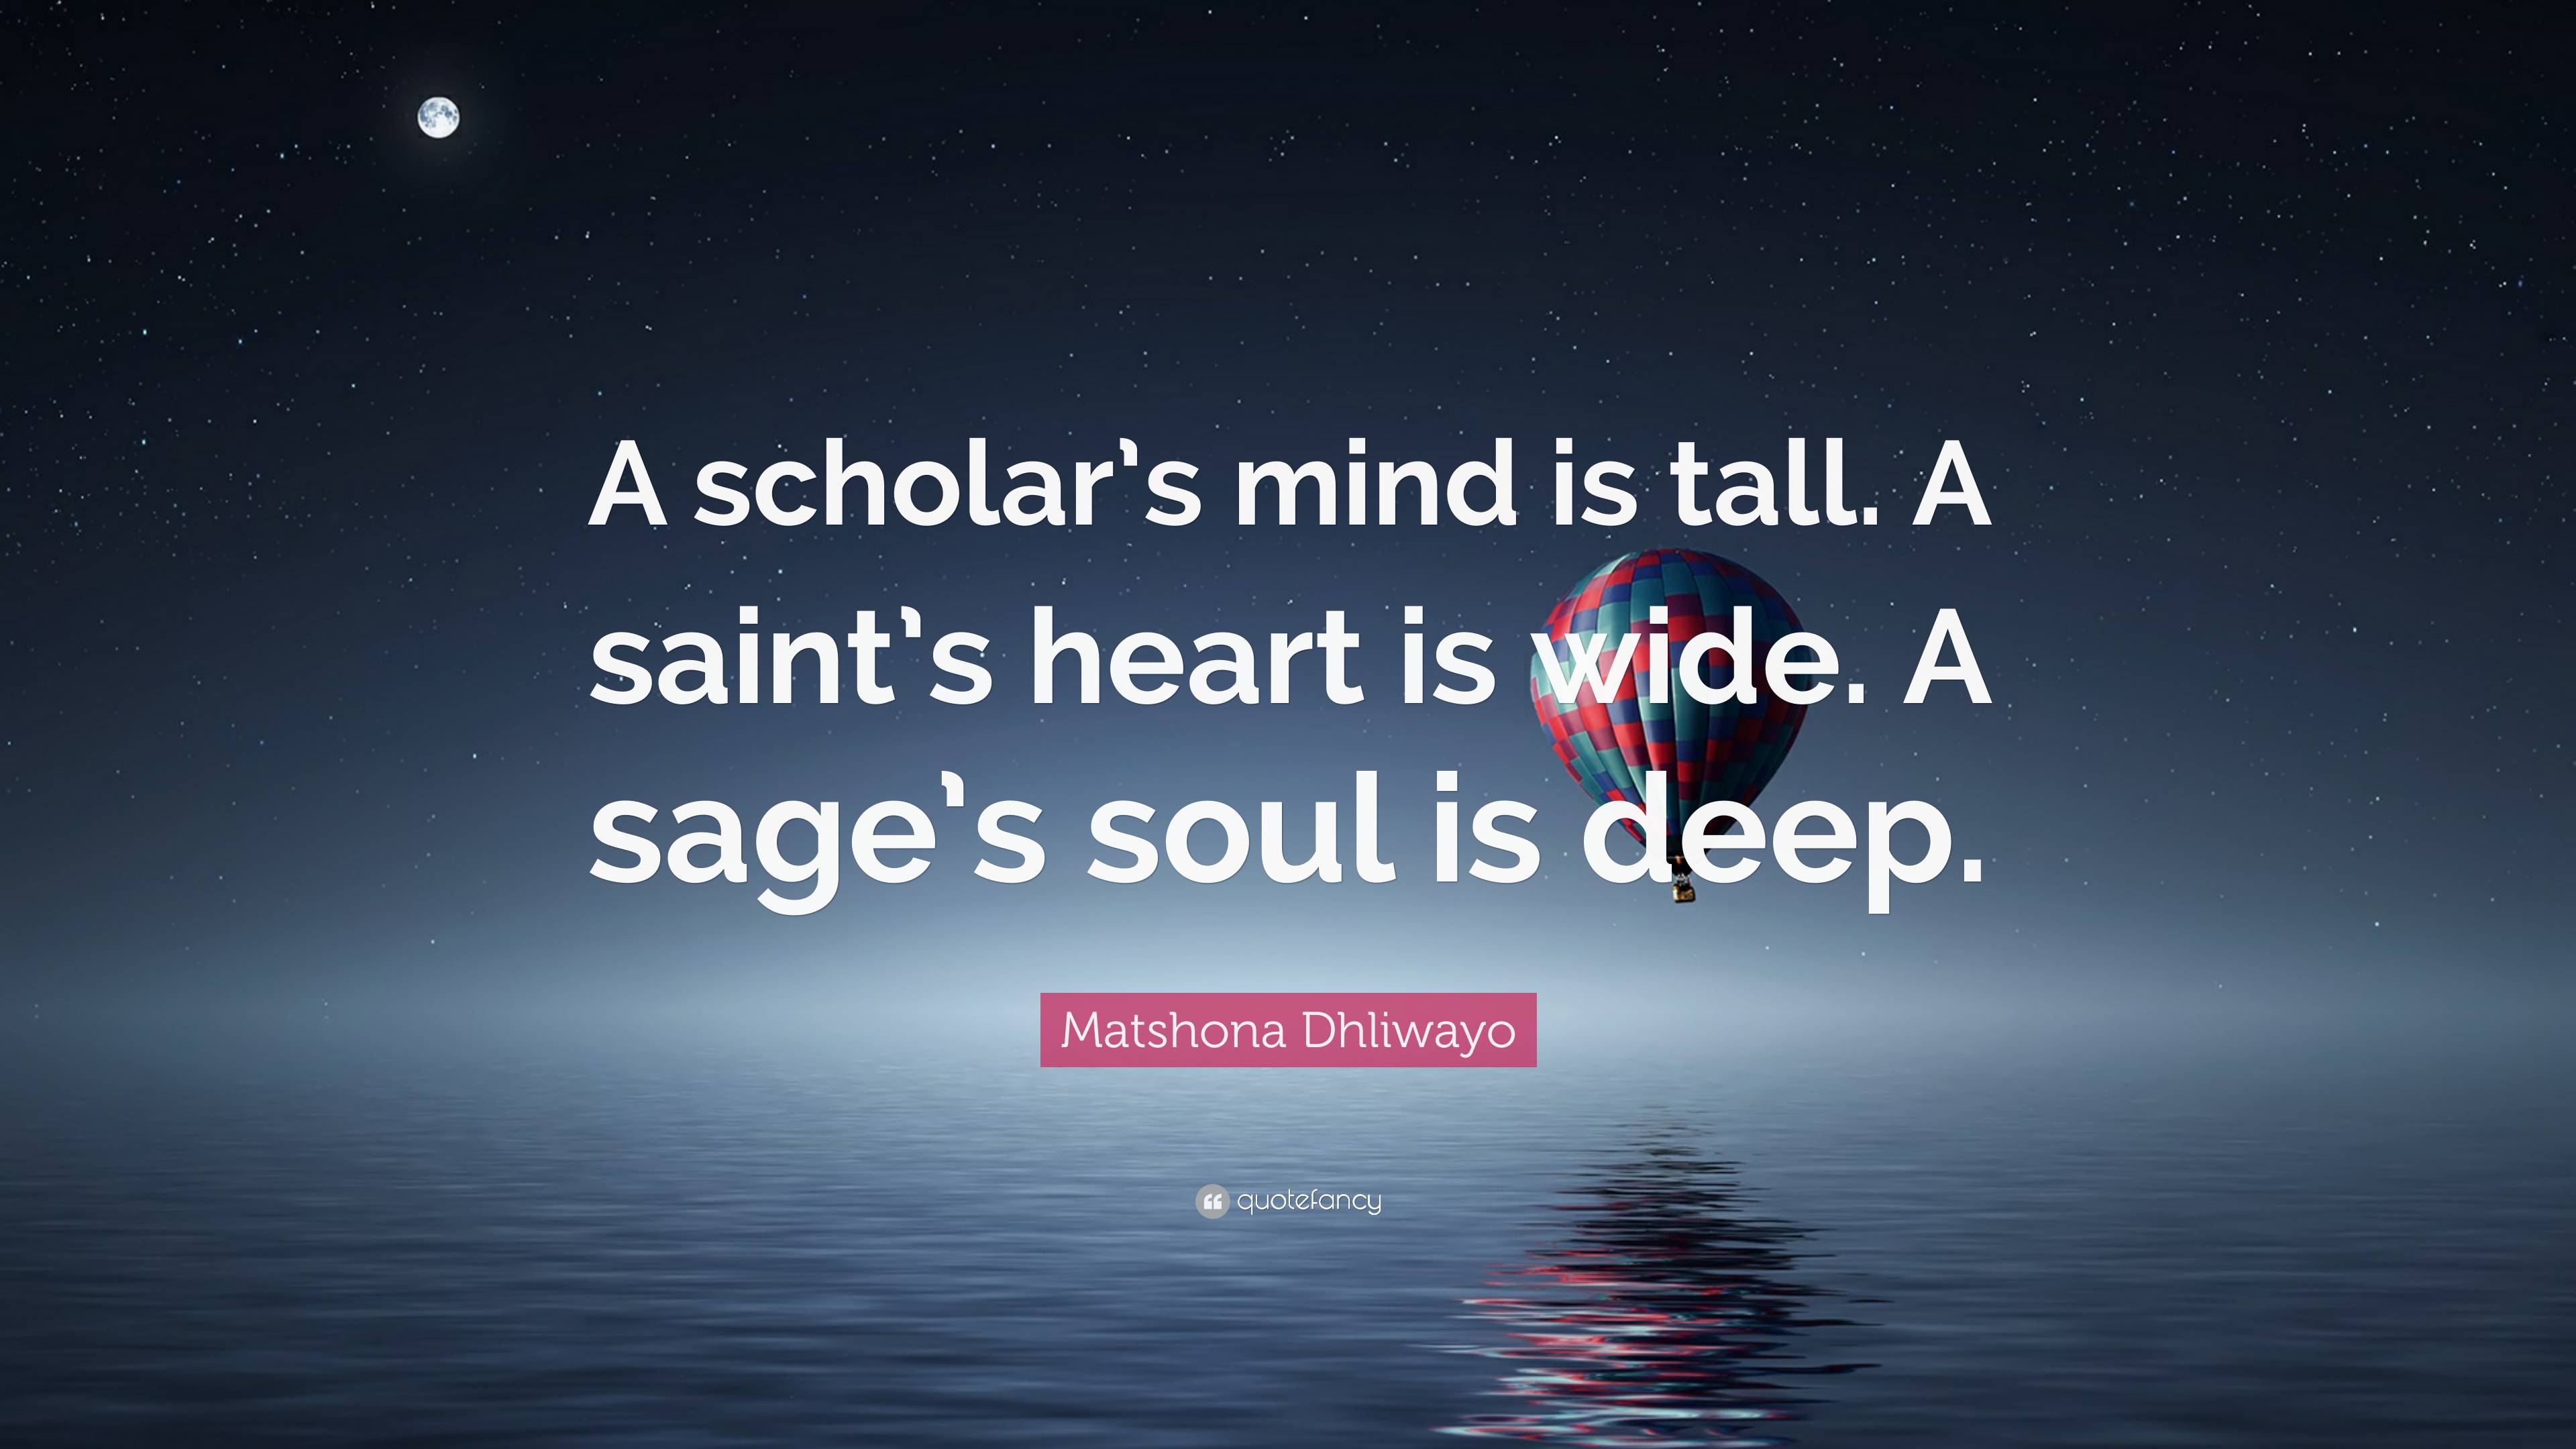 Matshona Dhliwayo Quote: “A scholar's mind is tall. A saint's heart is  wide. A sage's soul